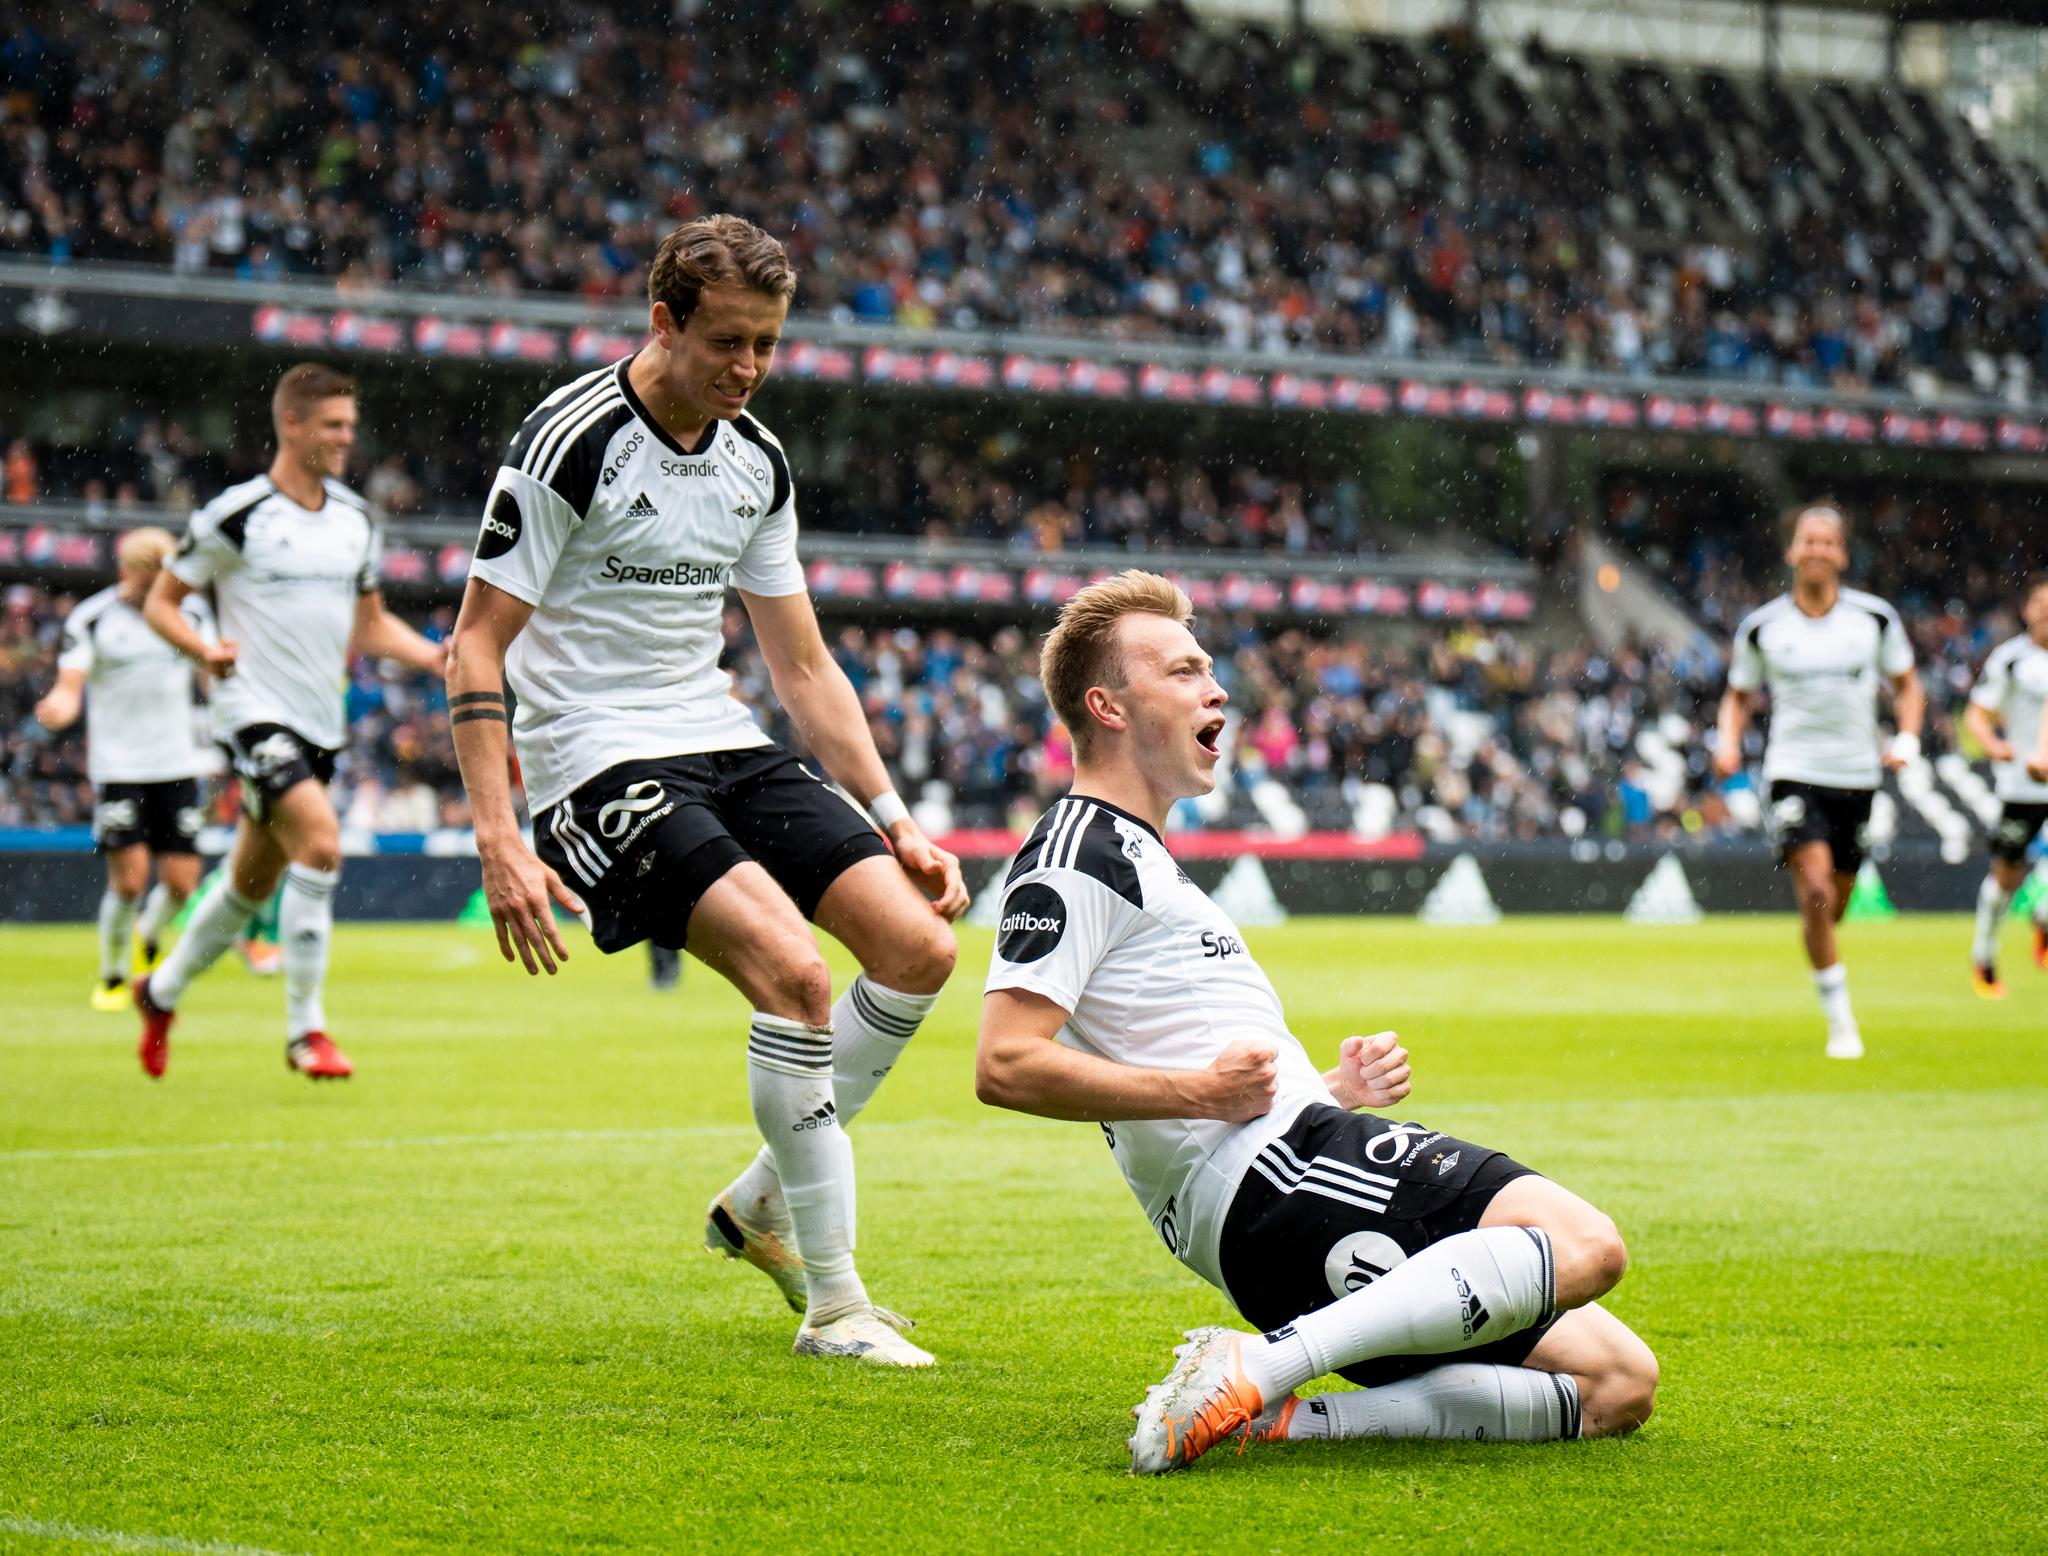 Dream debut for the new forward Rosenborg: – What an experience